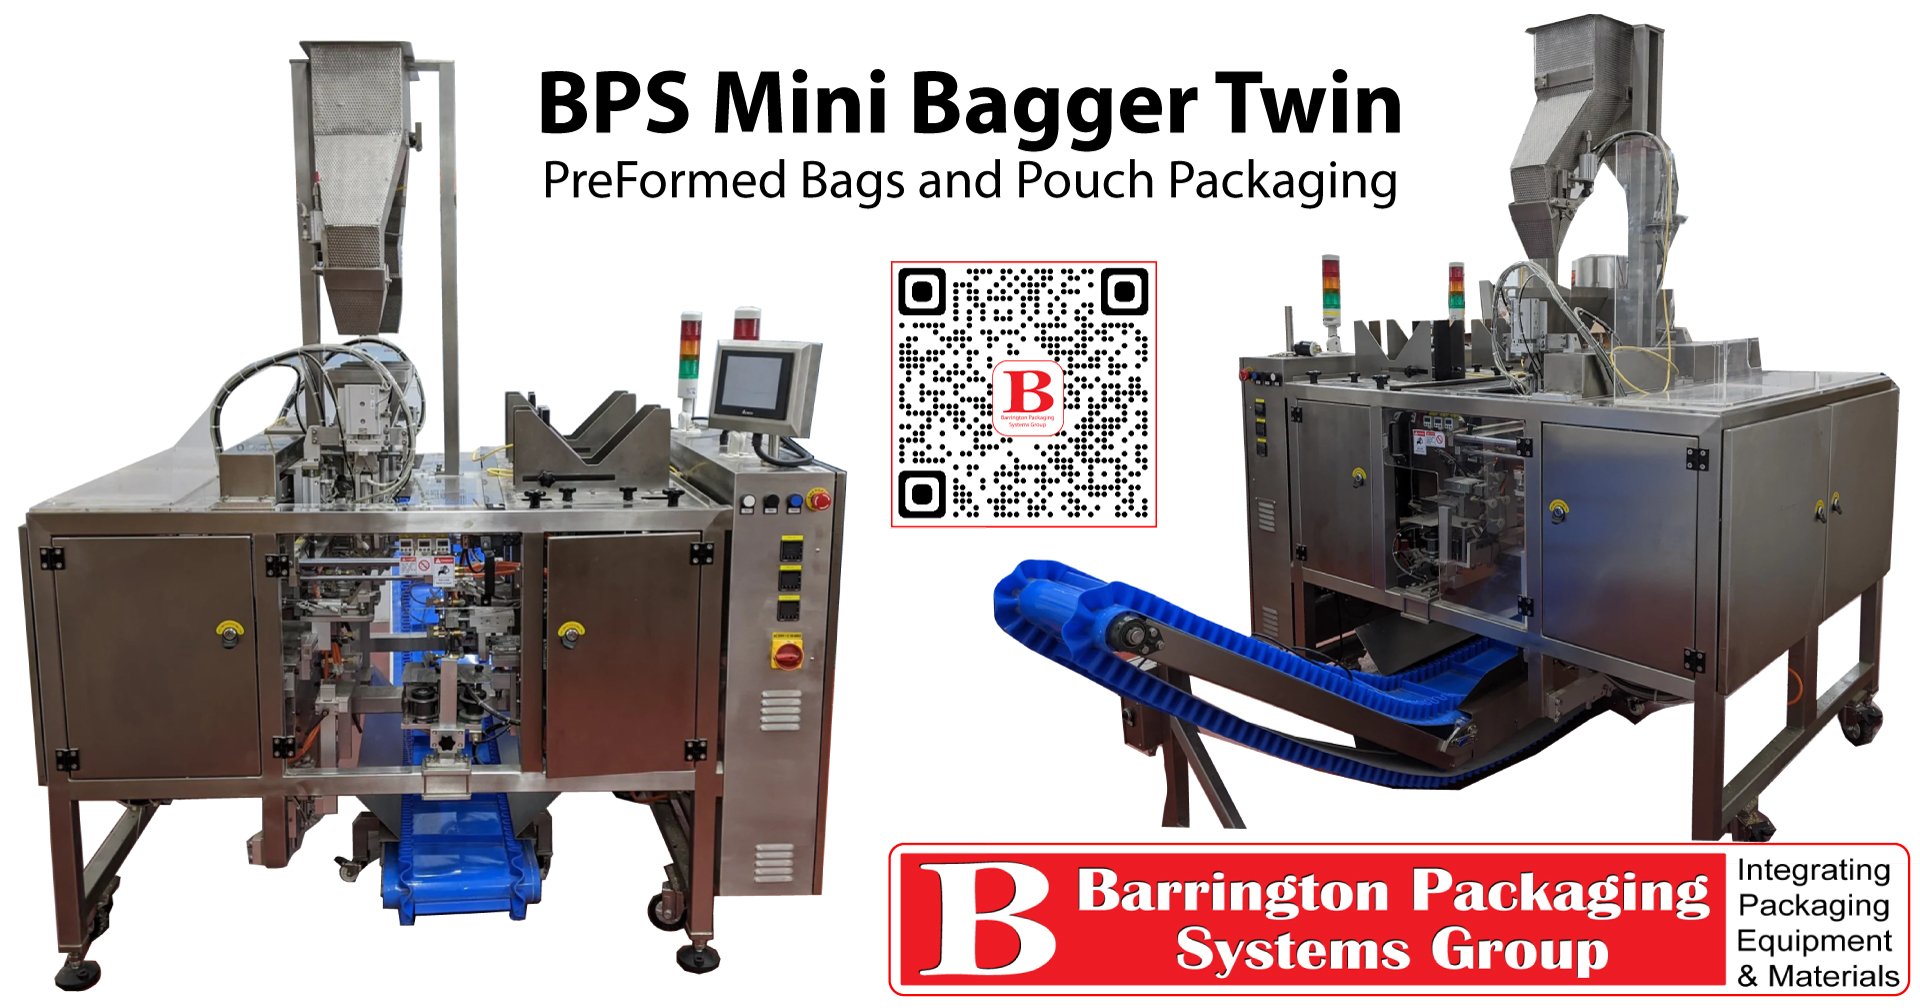 888-814-7999 Barrington Packaging Systems Group Mini Bagger